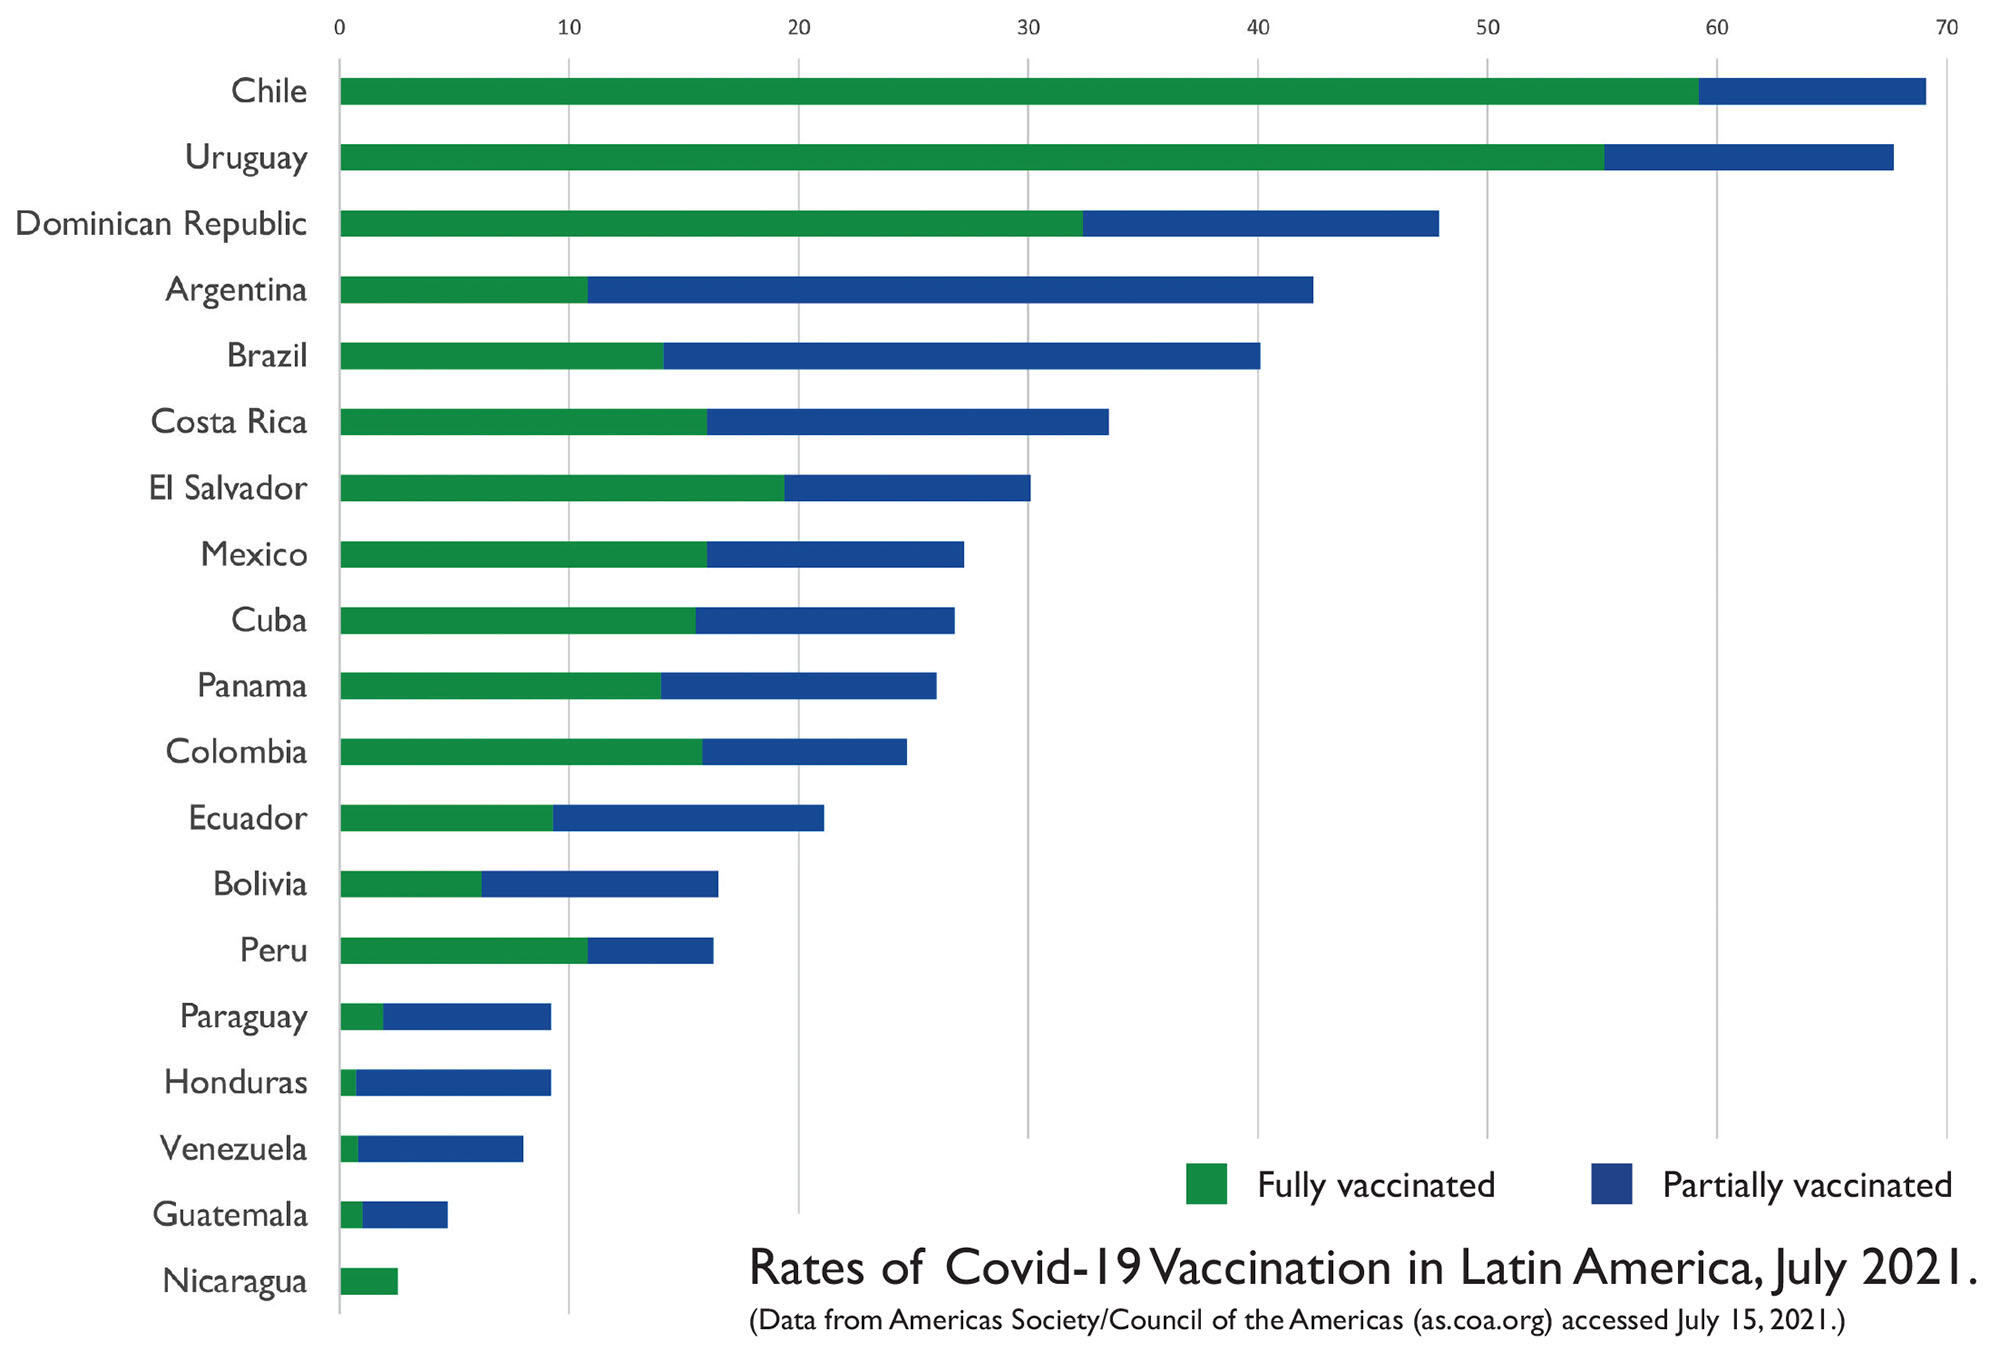 Chart of vaccination progress in Latin America, July 2021, shows Chile and Uruguay doing well, while other countries lag badly. (Data from Americas Society/Council of the Americas (as.coa.org) accessed July 15, 2021.)